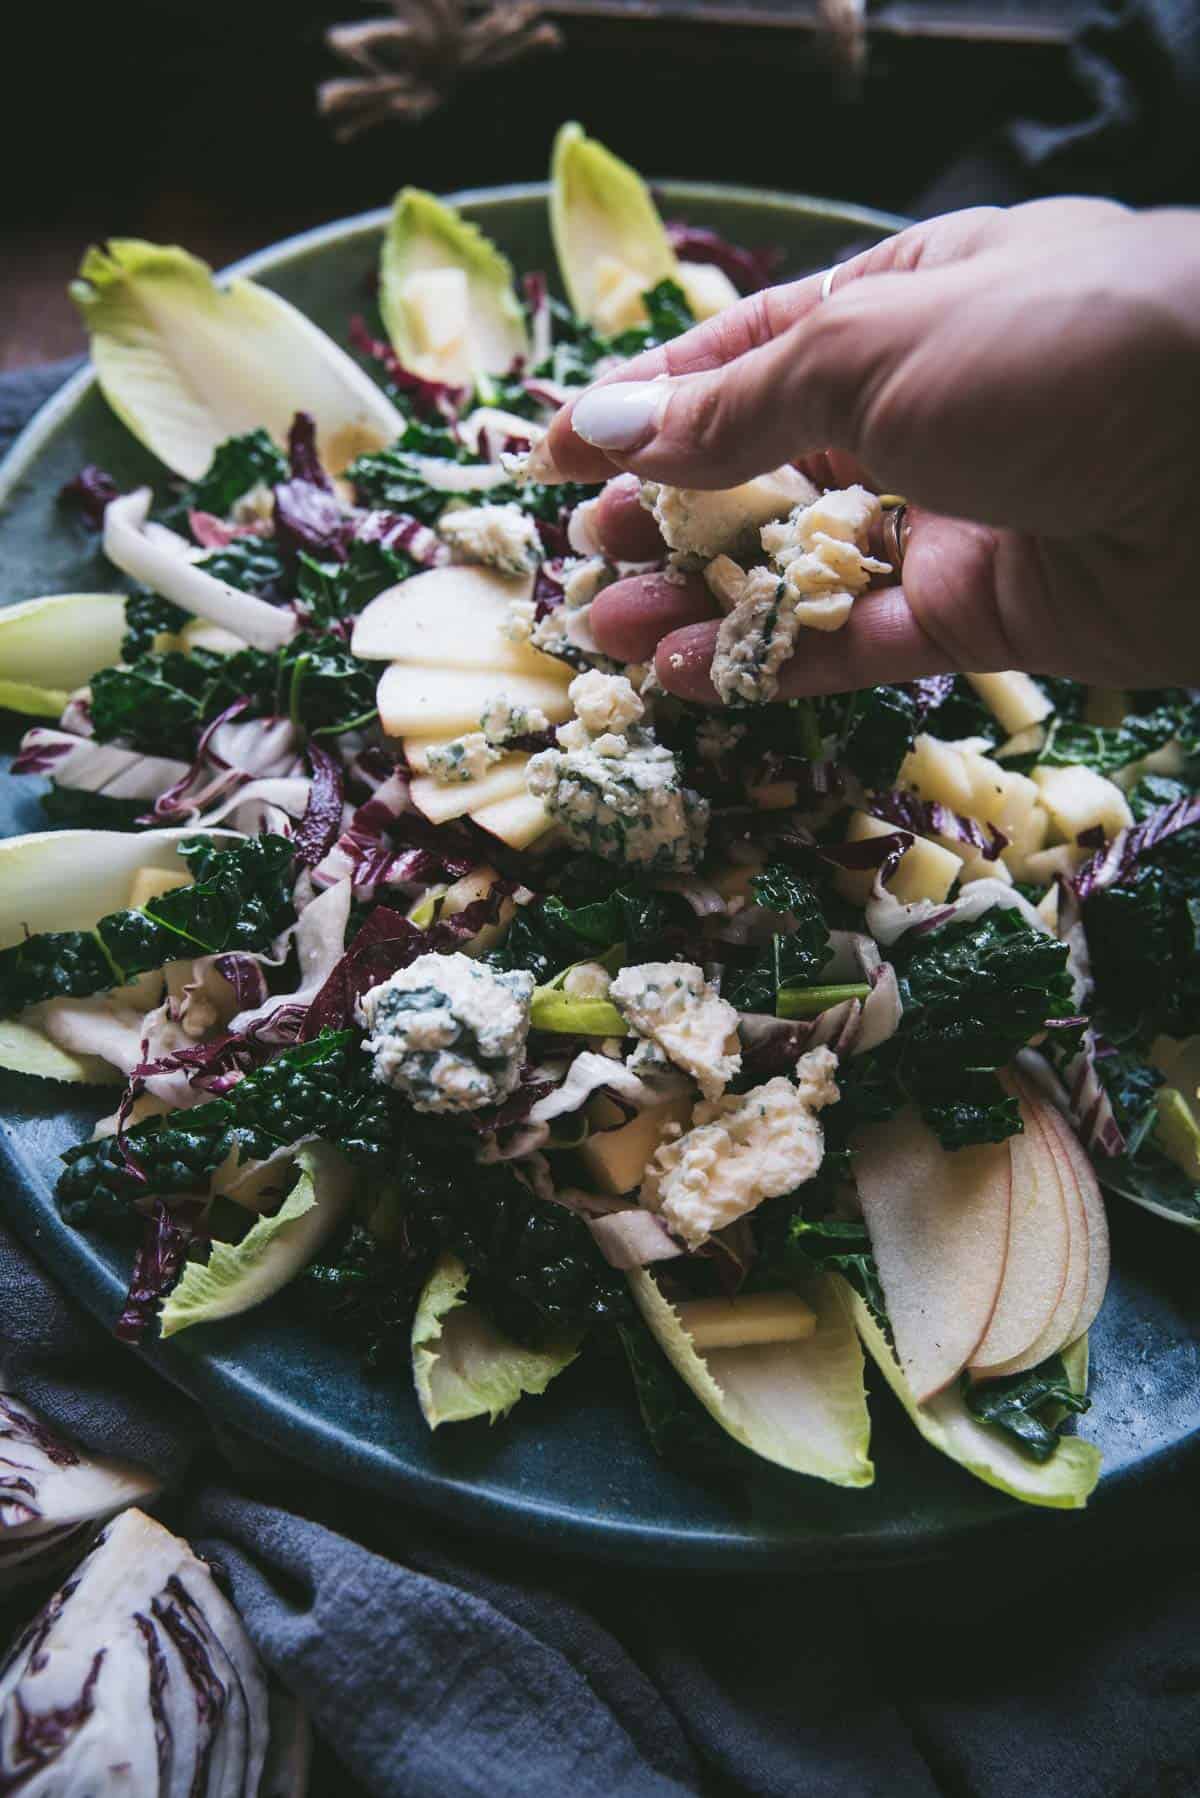 hand crumbling and sprinkling gorgonzola cheese over a salad.  The salad is on a green ceramic plate topped with whole endive leaves, kale, and apples